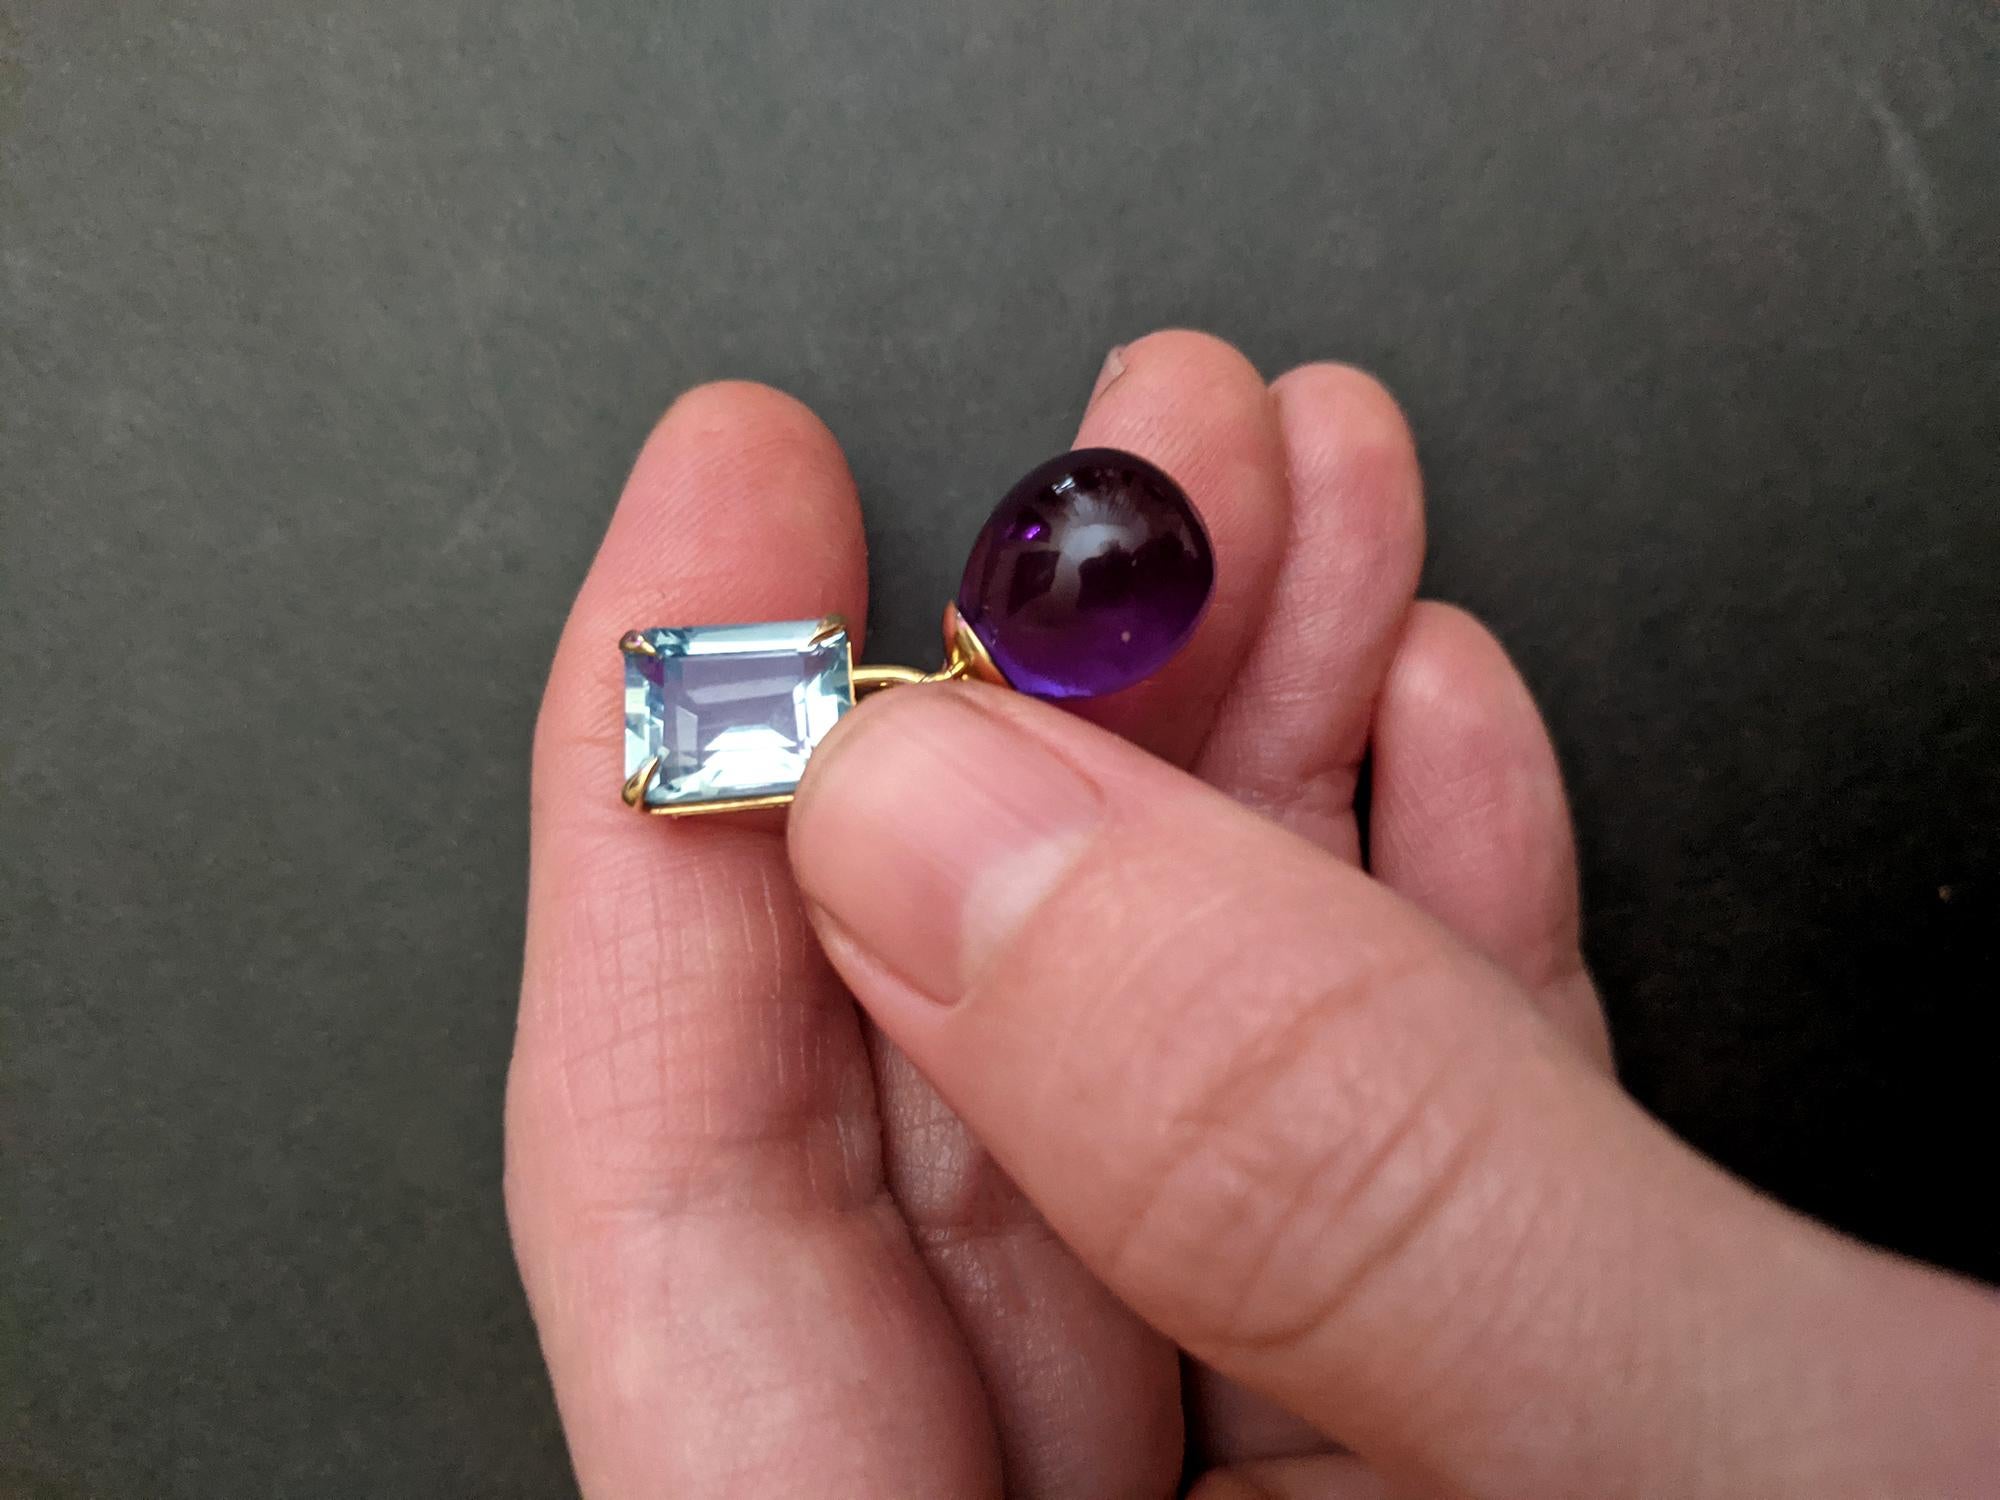 This contemporary transformer drop brooch showcases the elegance of 18 karat yellow gold, featuring a detachable amethyst gemstone in a drop cut. The piece is adorned with a natural ruby, weighing 0.9 carats and measuring 0.3x0.2 inches (7.5x5.5 mm)